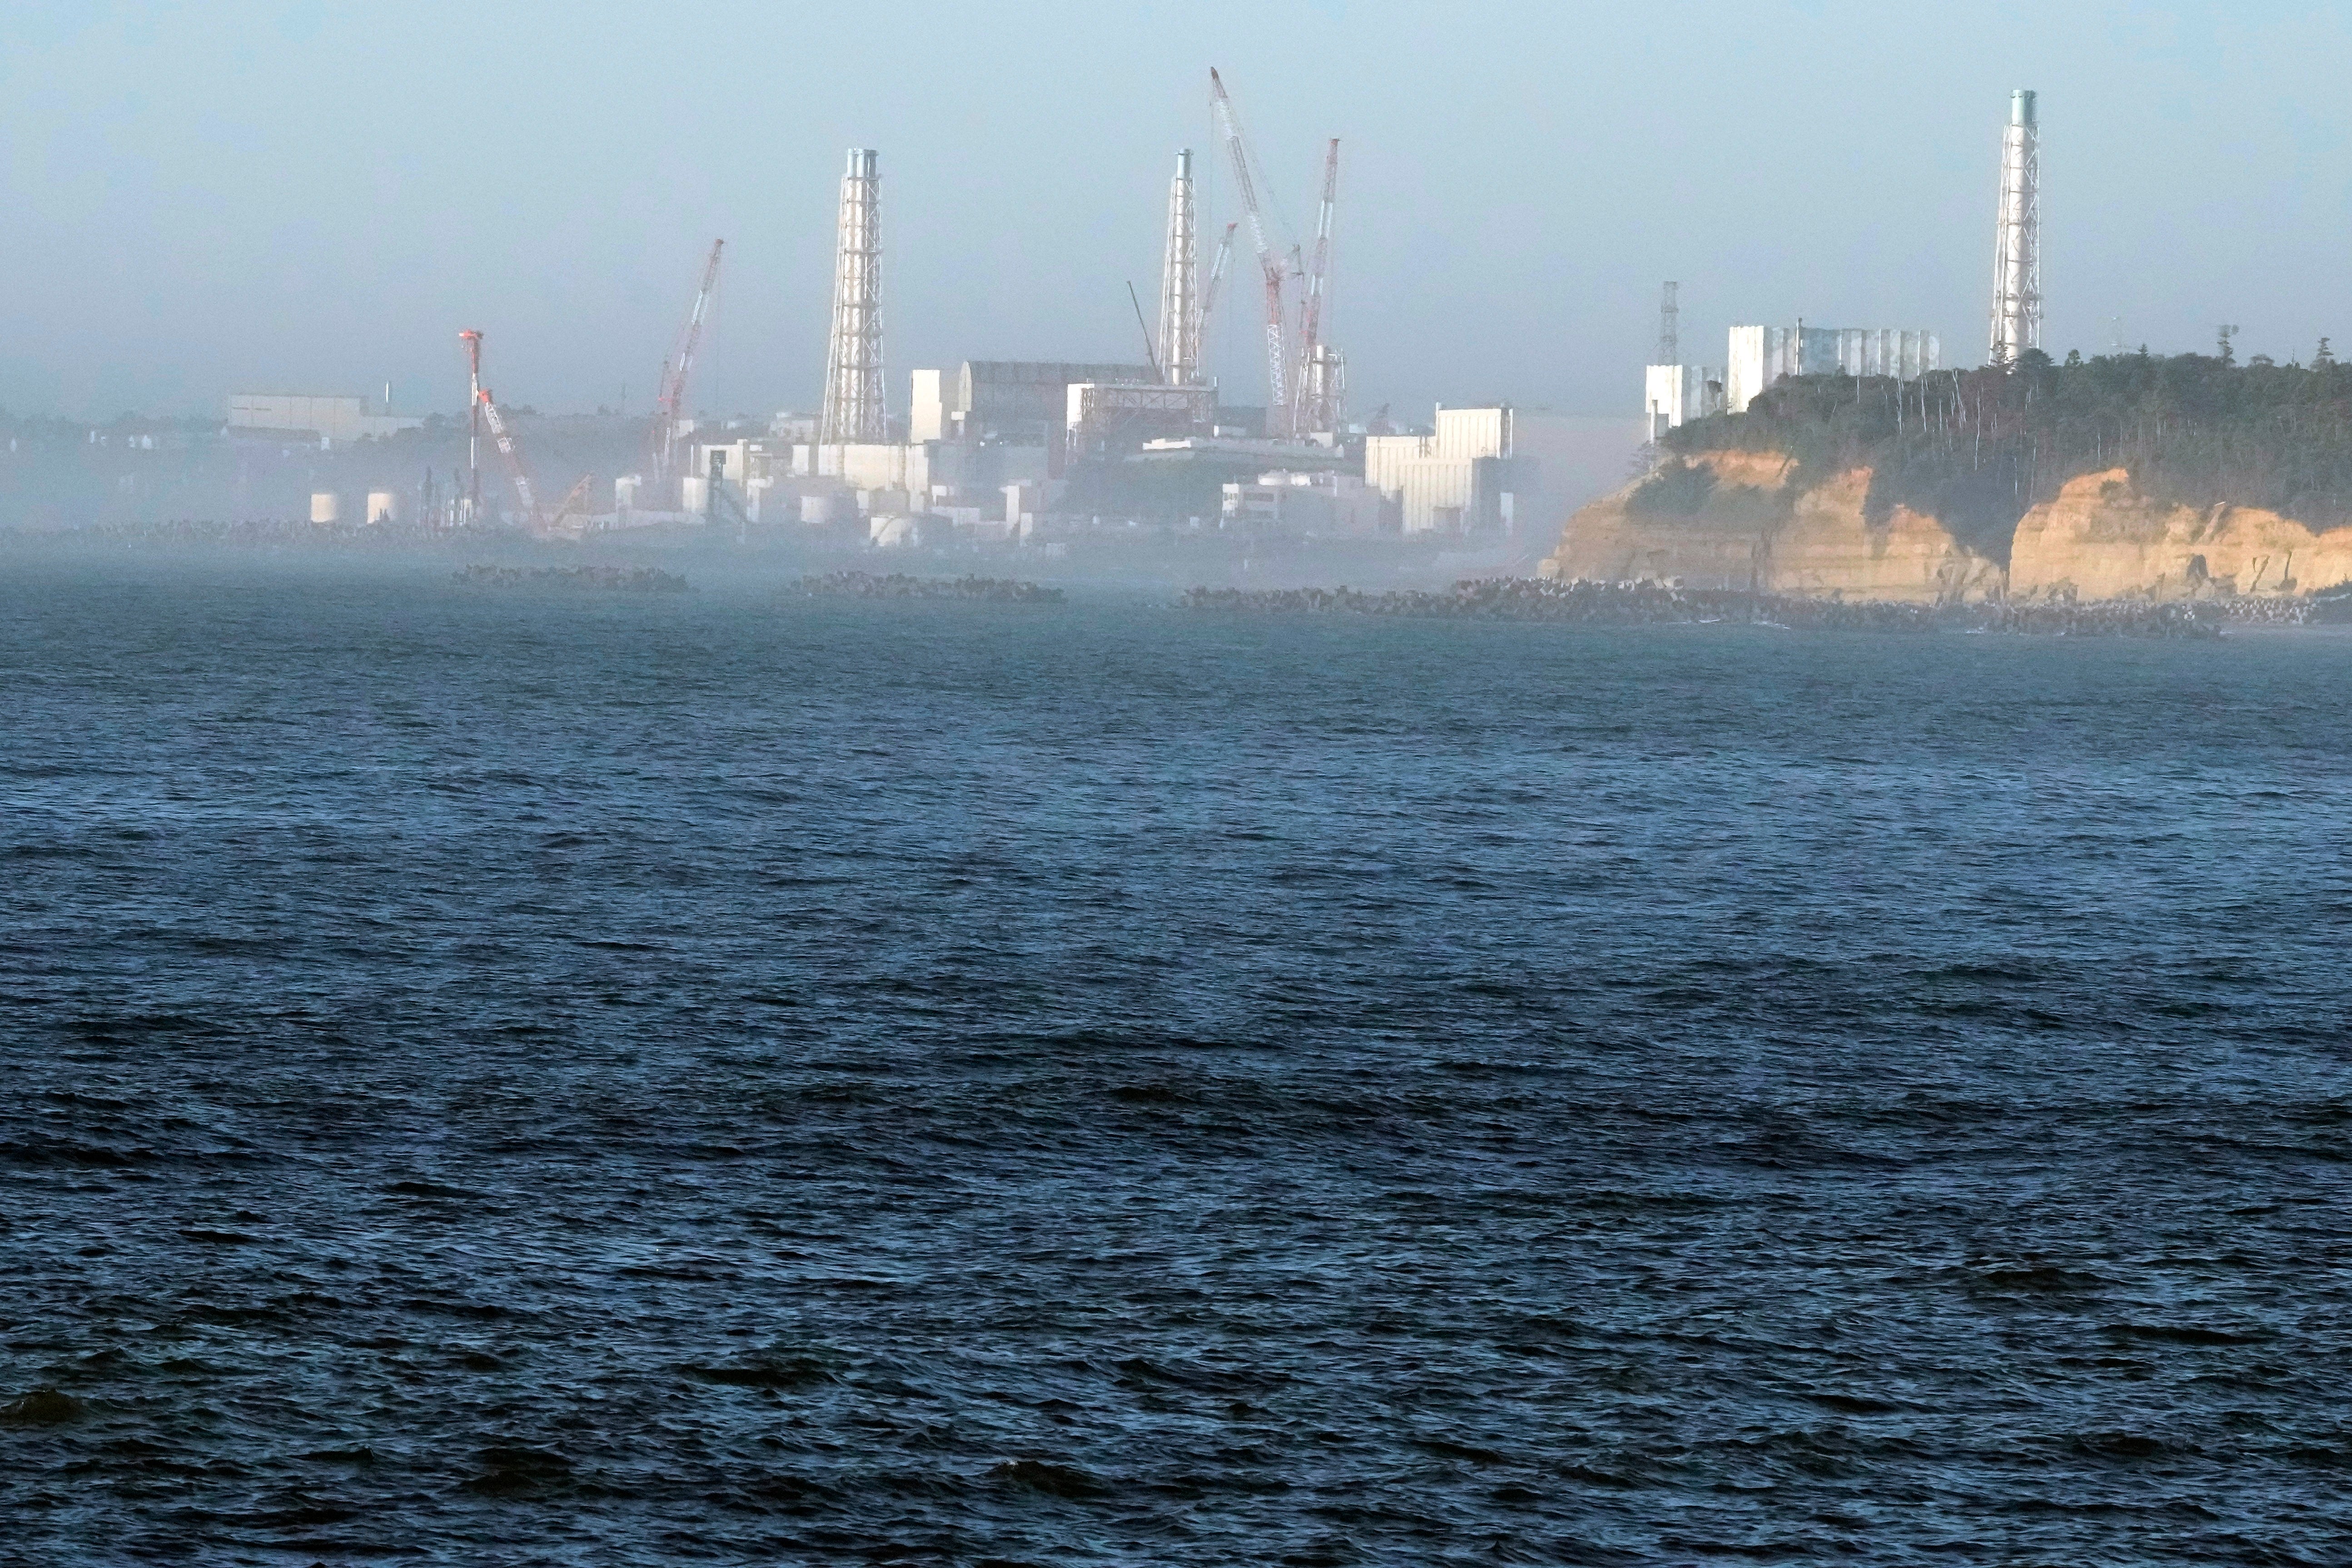 Water from the ruined Fukushima nuclear plant was discharged into the sea, much to the chagrin of China